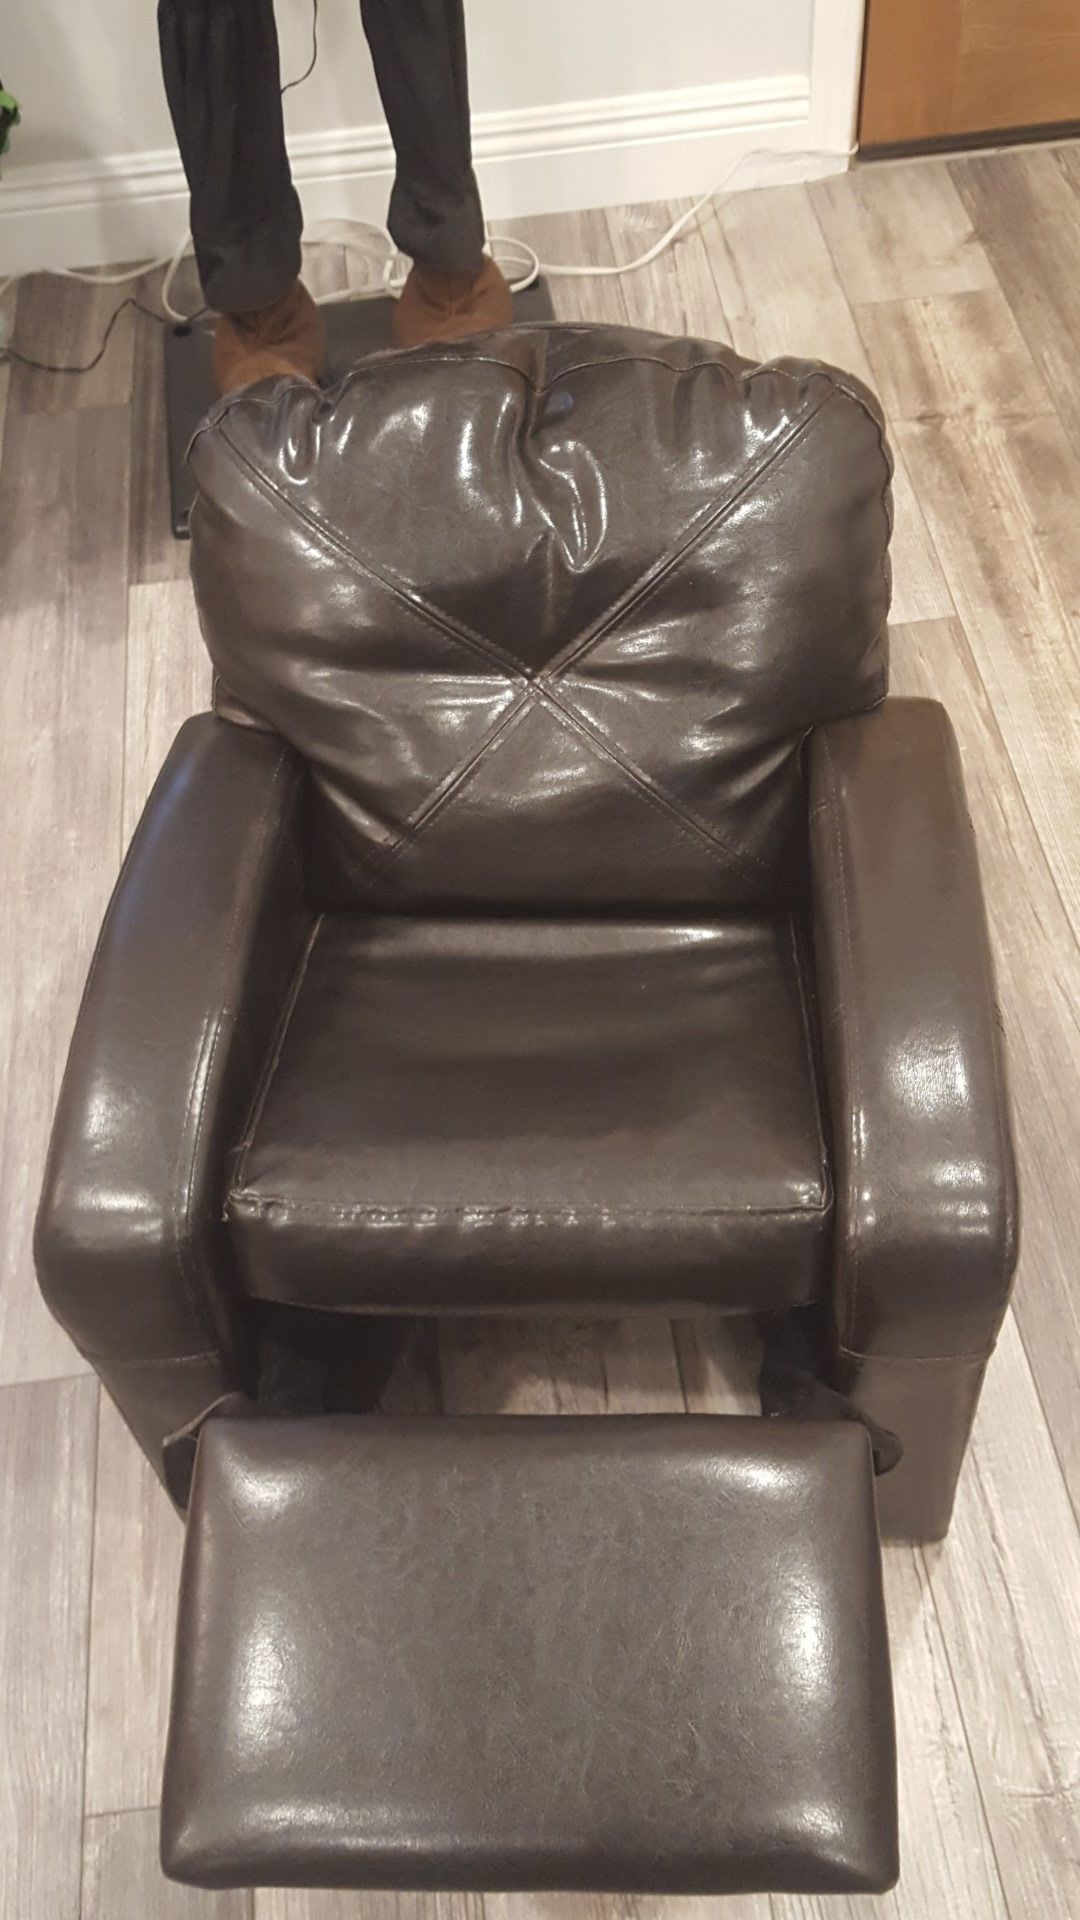 Kids soft brown recliner. H24in. By W20in.